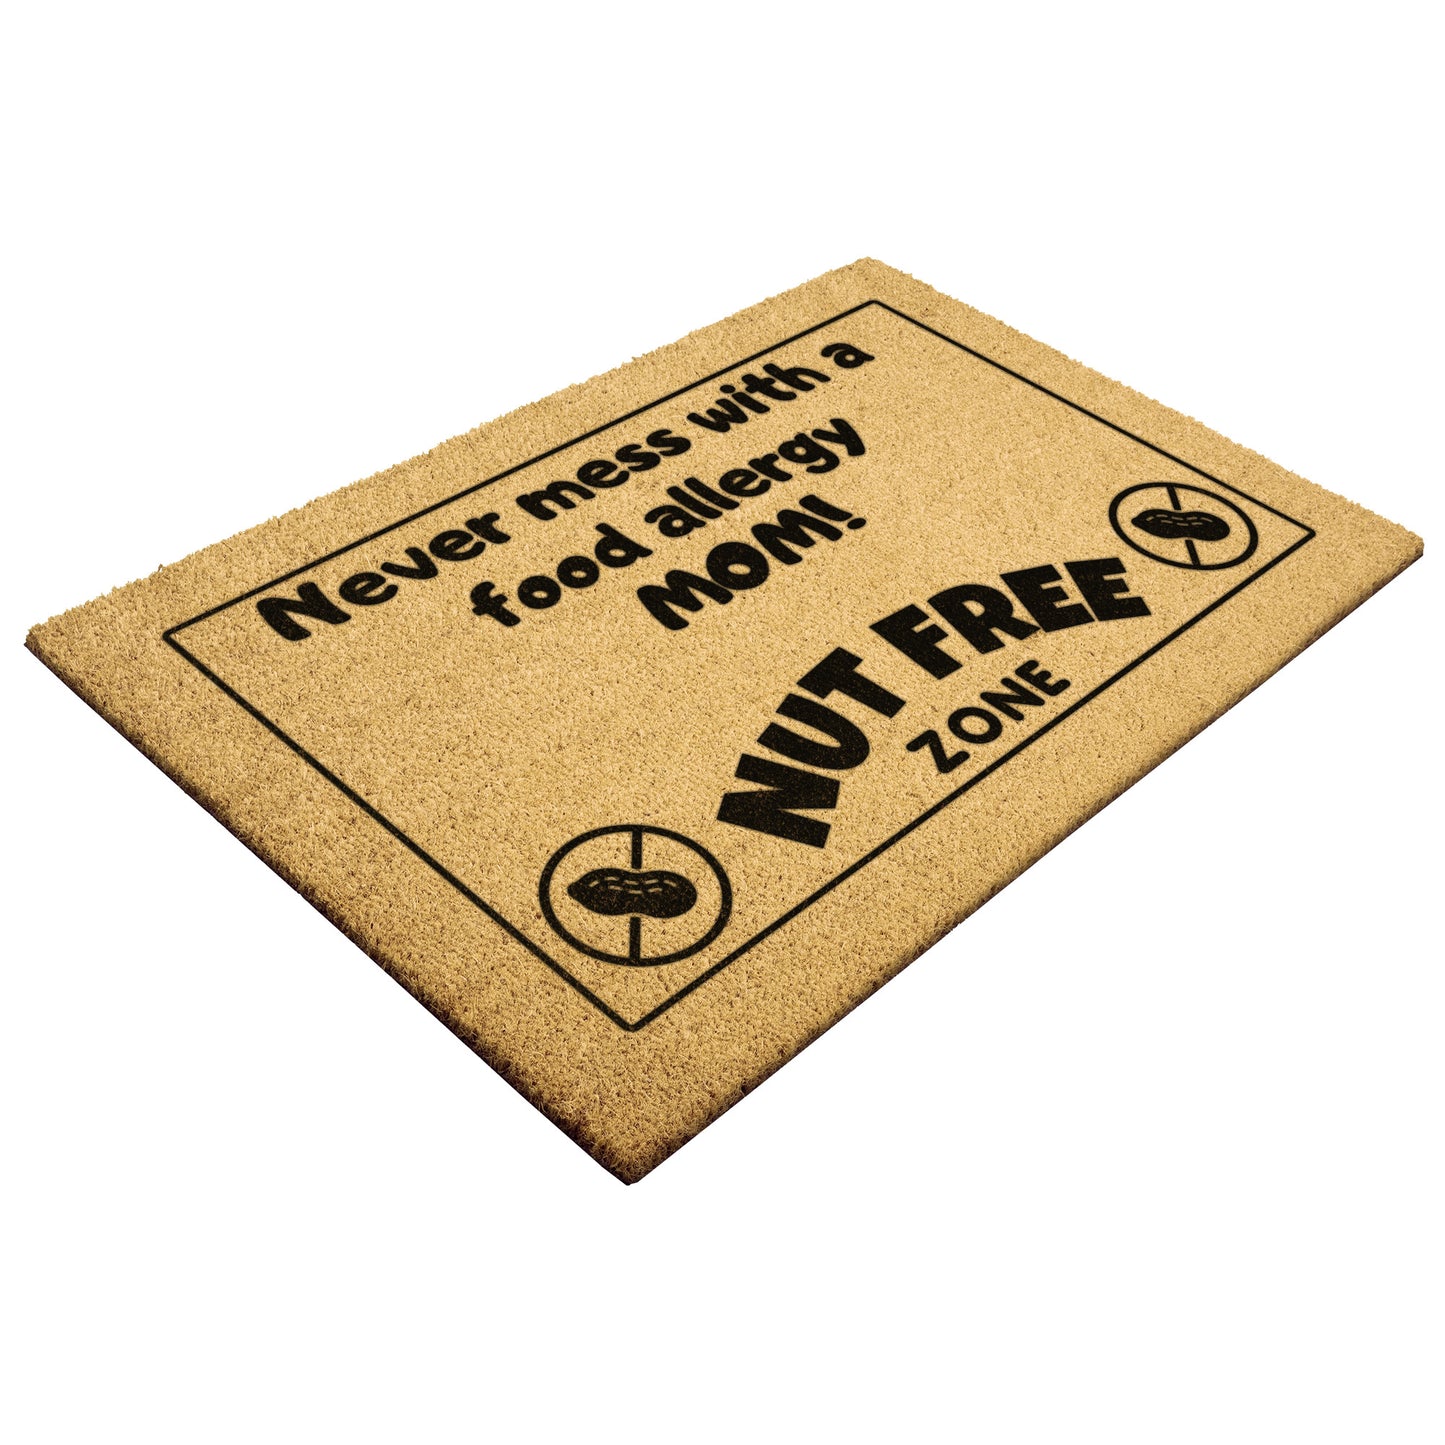 Fun Food Nut Allergy Welcome Door Mat - Don't mess with a food allergy mom! Nut Free Zone